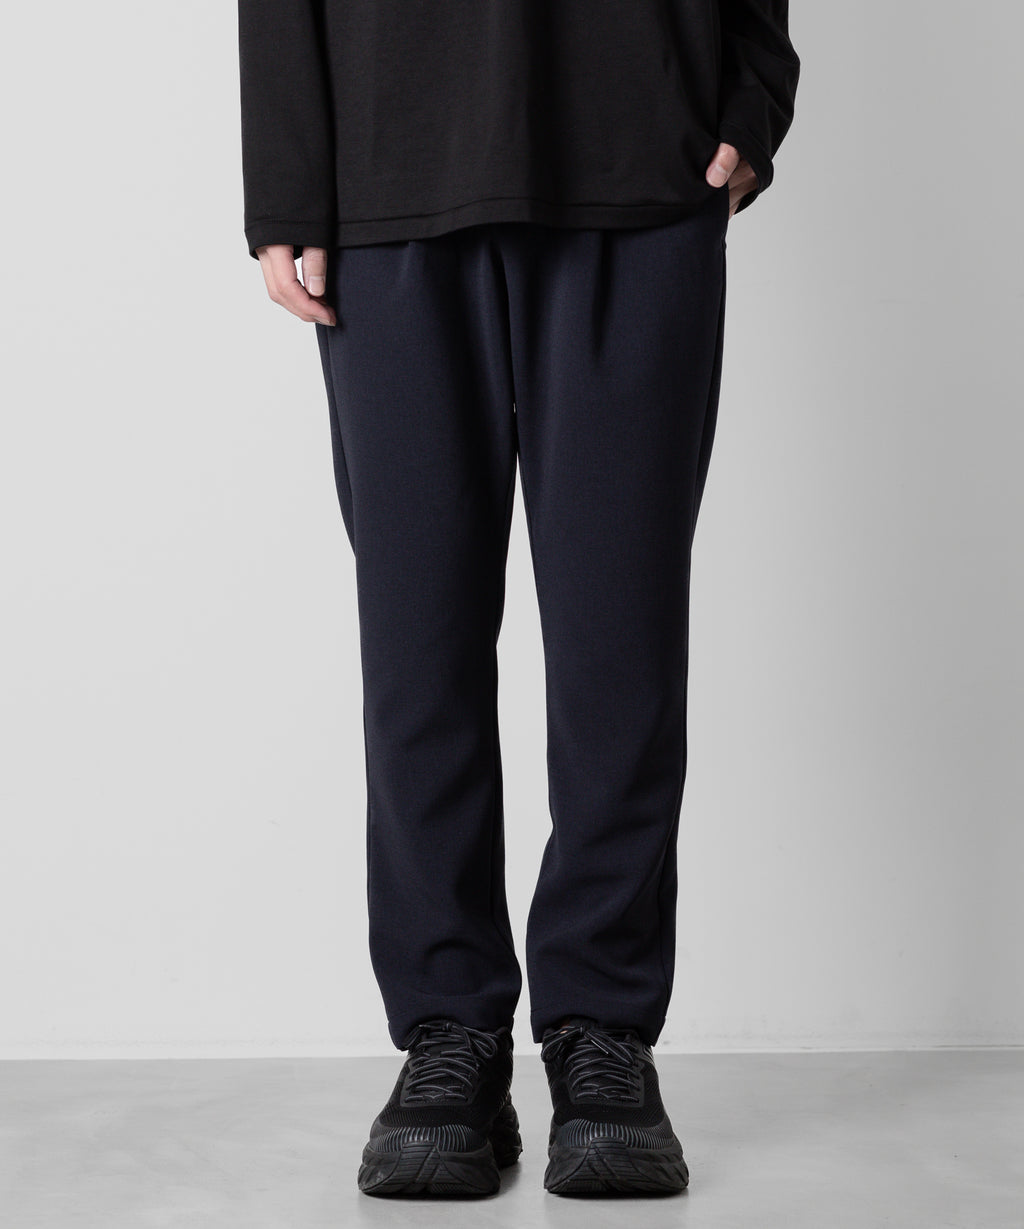 【ATTACHMENT】ATTACHMENT アタッチメントのPE STRETCH DOUBLE CLOTH REGULAR FIT EASY TROUSERS - NAVY 公式通販サイトsession福岡セレクトショップ